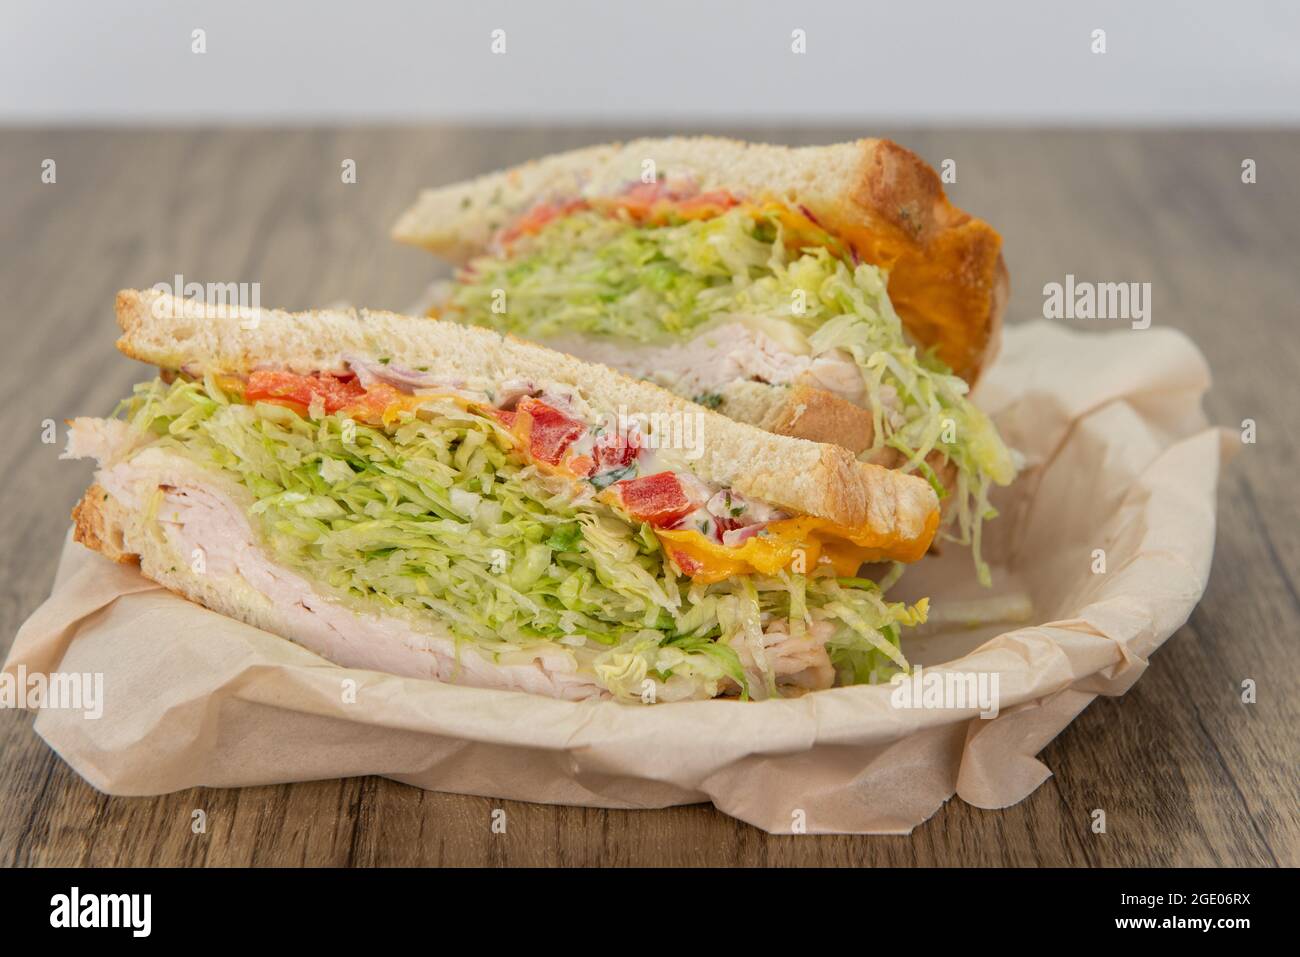 Turkey, mayo, and lettuce sandwich loaded with all the good fixings to completely fill any appetite for a meal. Stock Photo